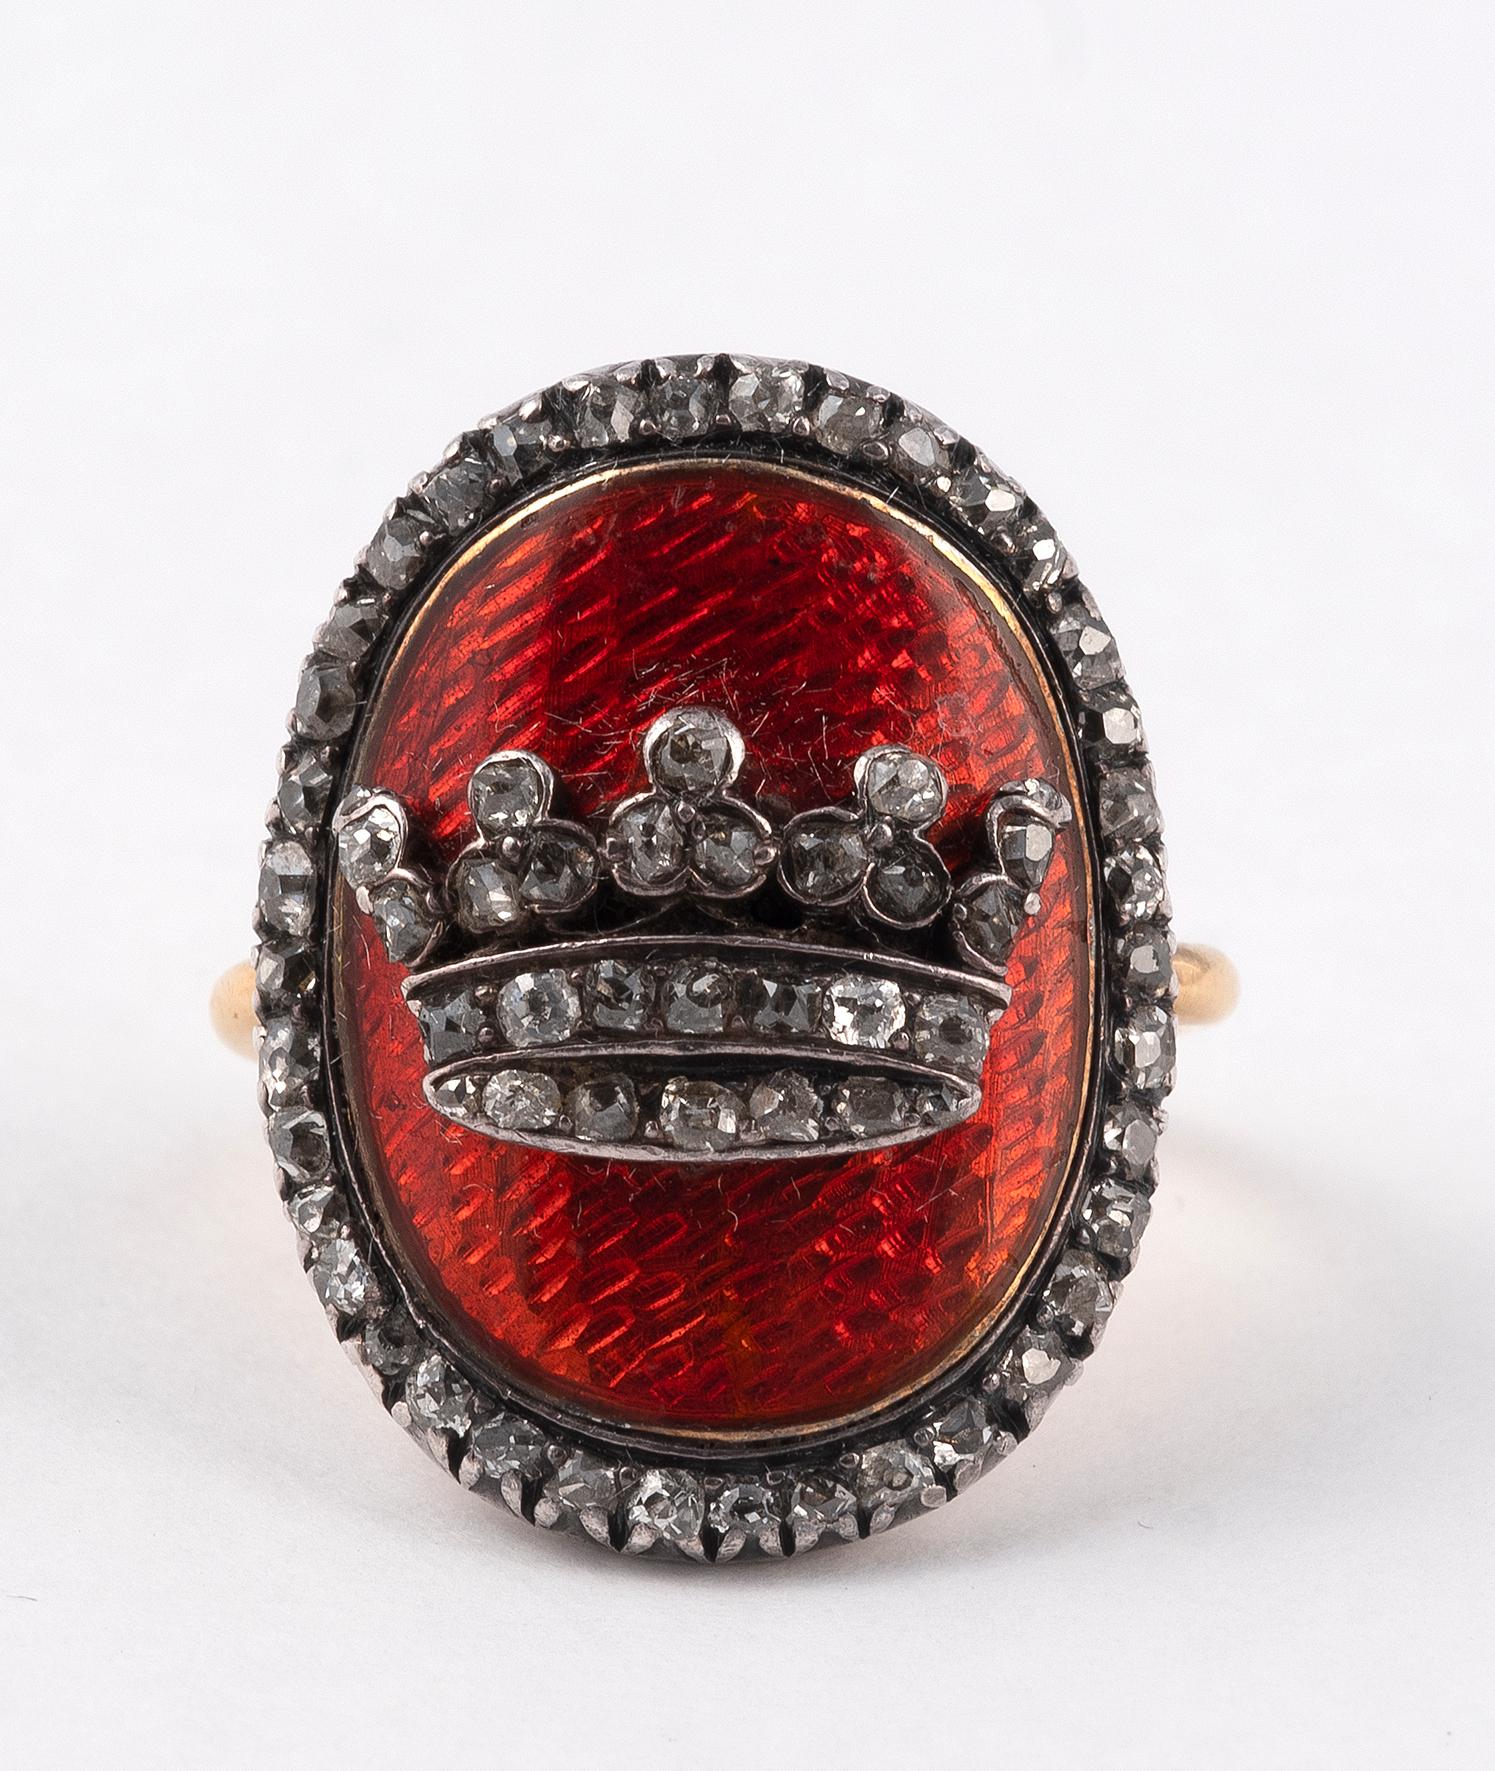 Ring in yellow gold 18 carats and silver decorated with a crown on a red guilloche background and set with diamonds cut in rose.
Size of finger: 5 
Gross weight: 9,6 g